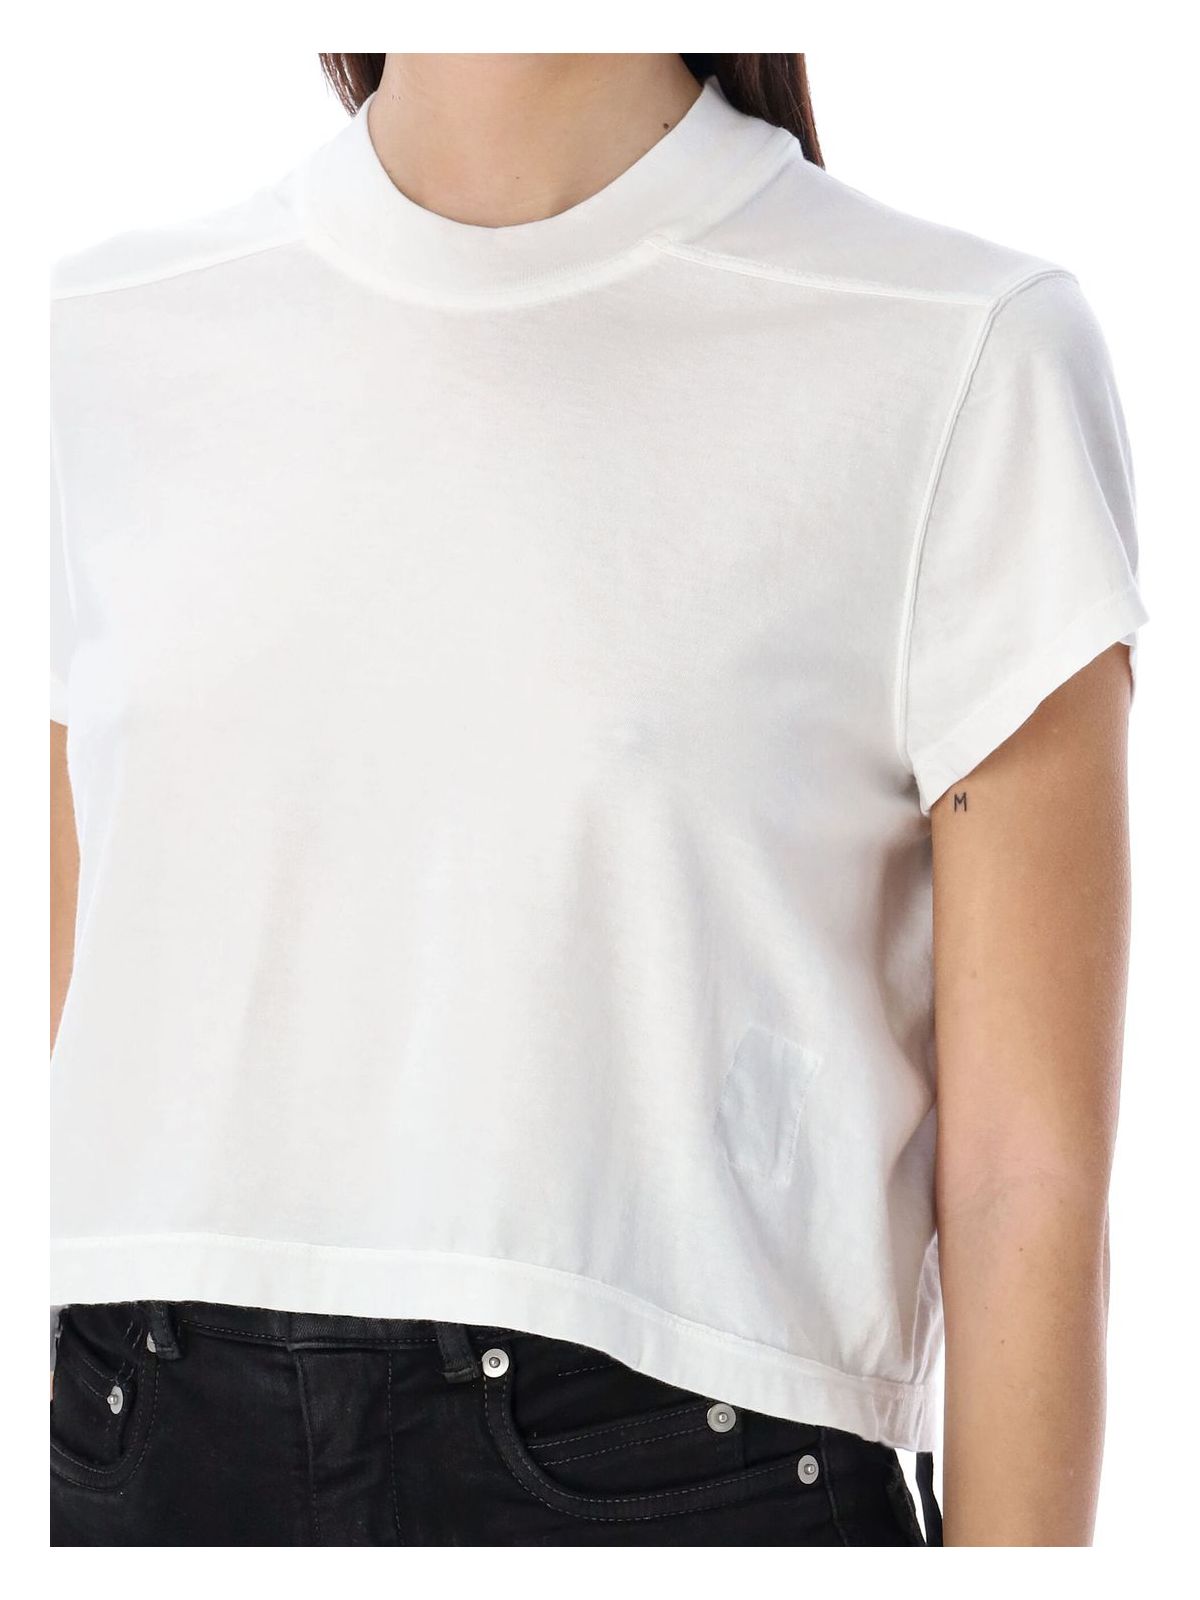 11 DRKSHDW CROPPED SMALL LEVEL T